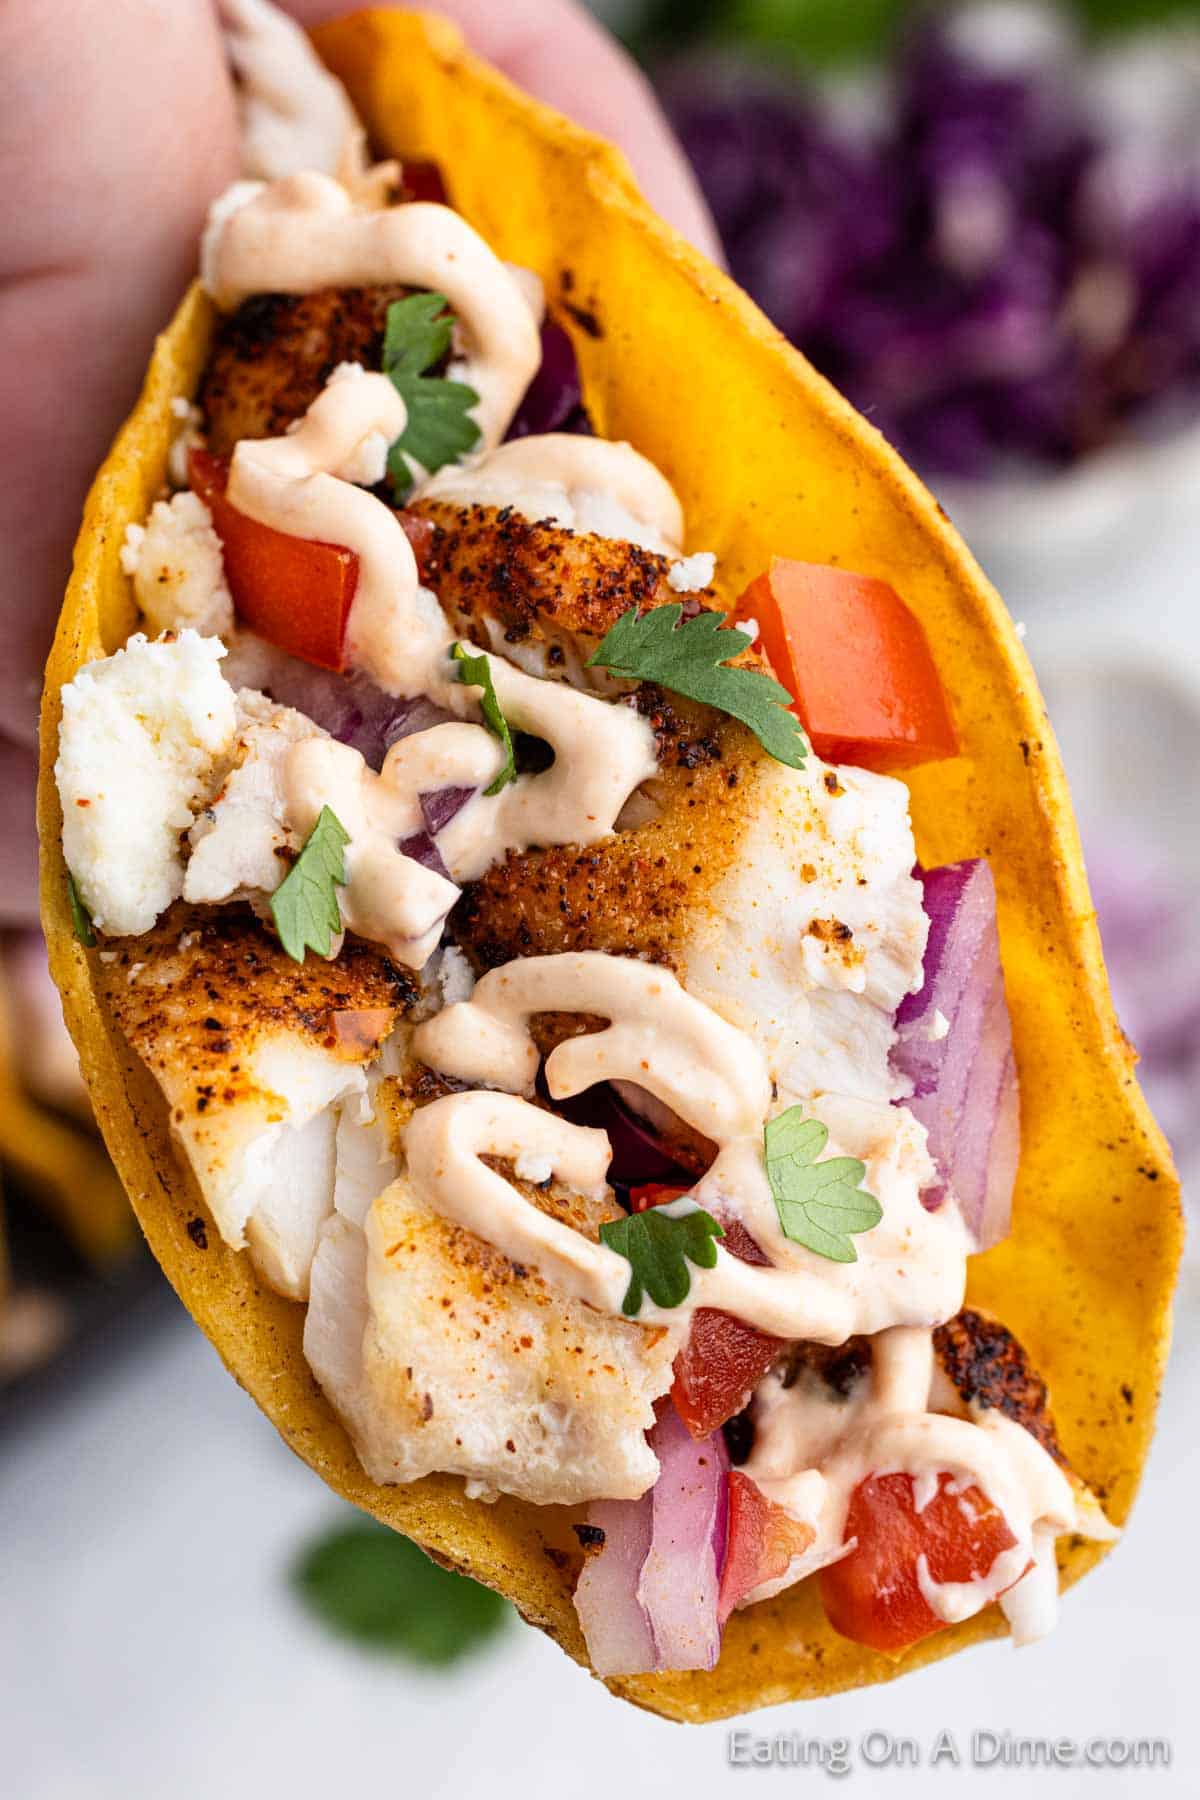 A close-up of a hand holding a taco with grilled fish, diced tomatoes, red onions, fresh cilantro, and a drizzle of creamy sauce, all encased in a yellow corn tortilla. The background has a blurred image of purple cabbage—an easy fish tacos recipe come to life.